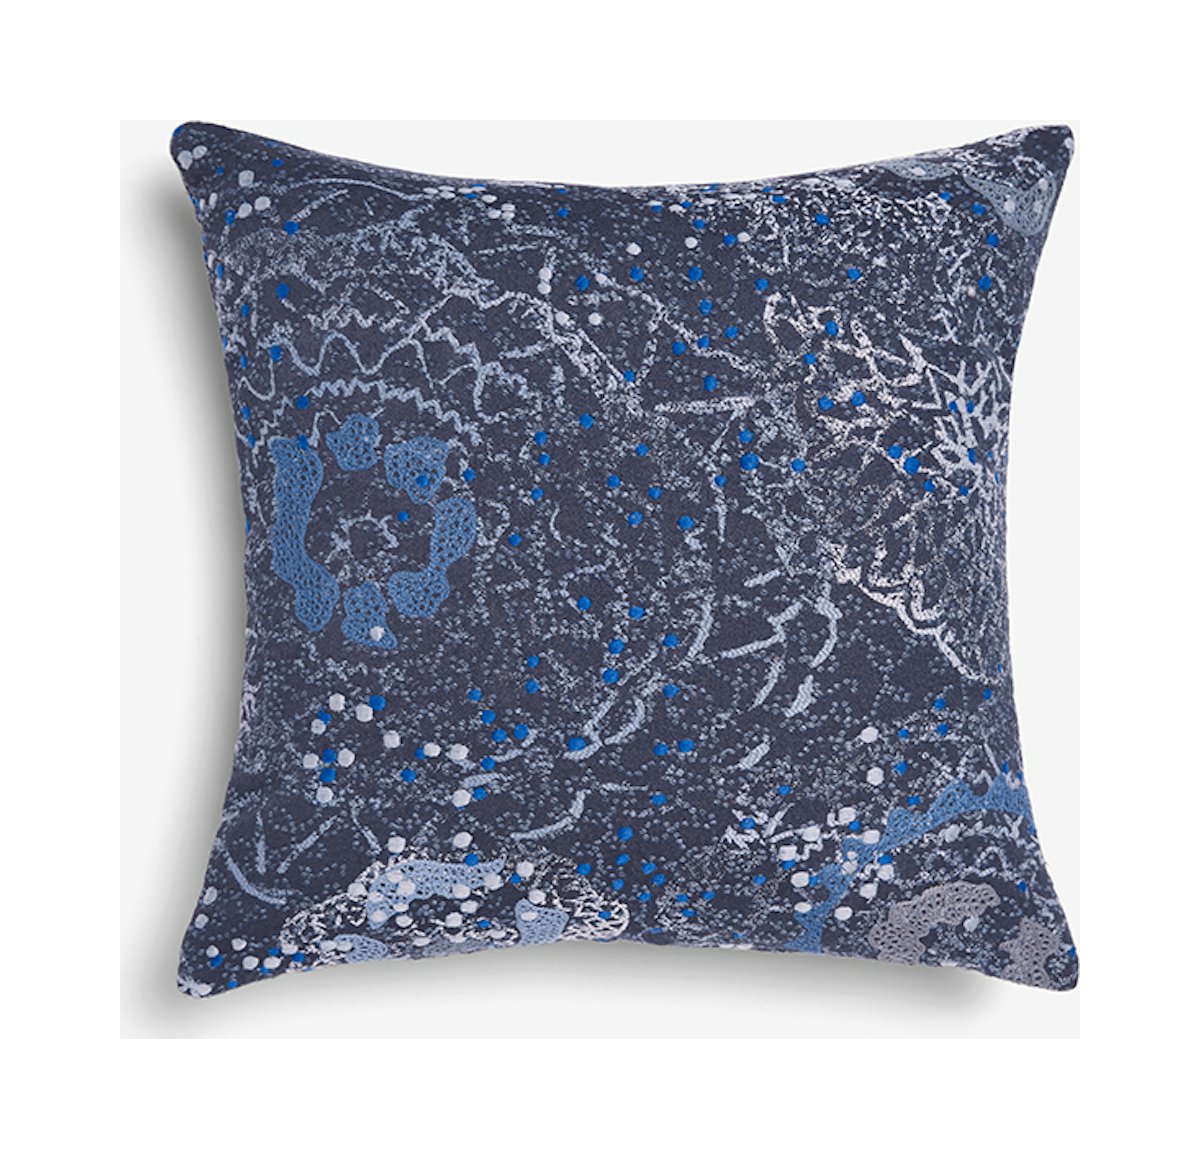 Doily Pillow by Nick Cave